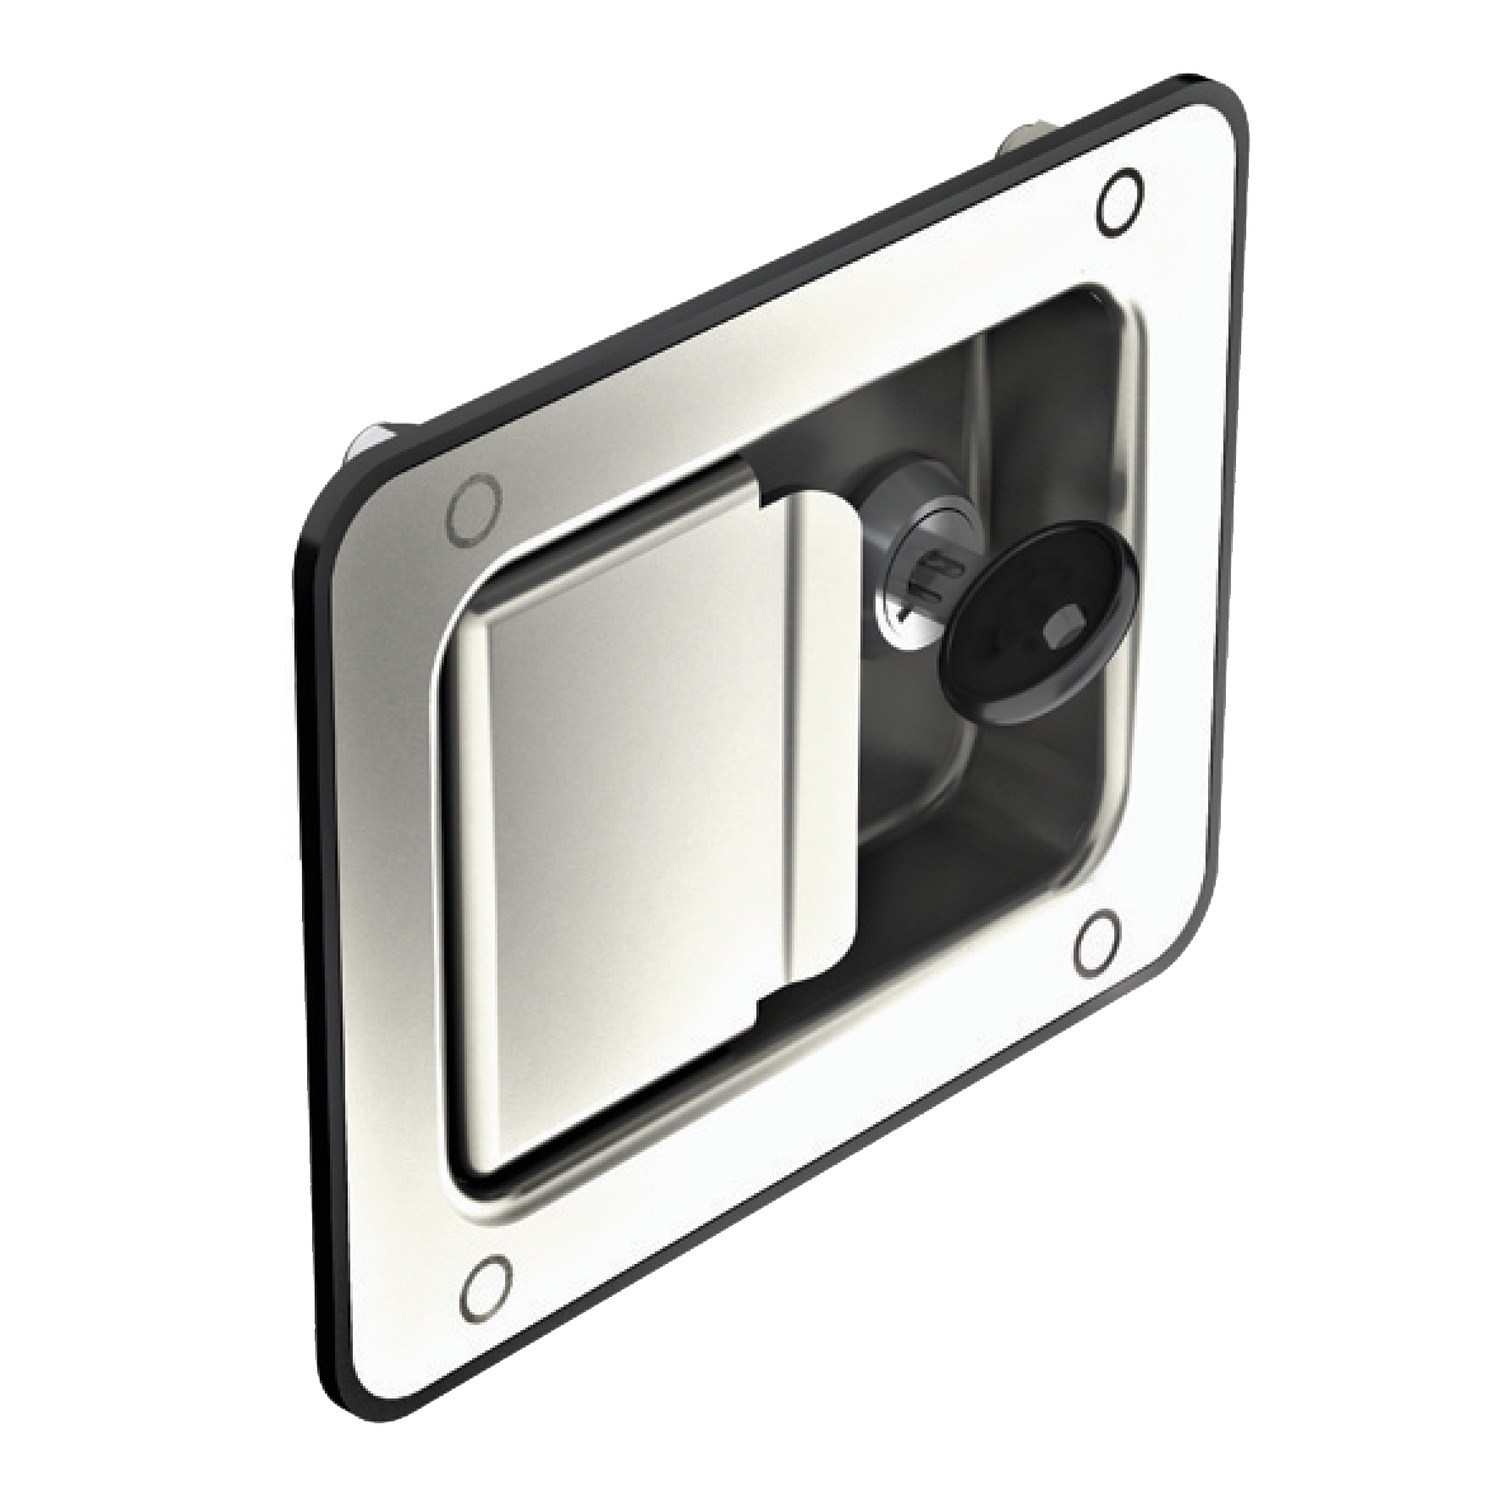 Product B4758, Push To Close Paddle Latches pull to open - standard cylinder lock - stainless steel / 